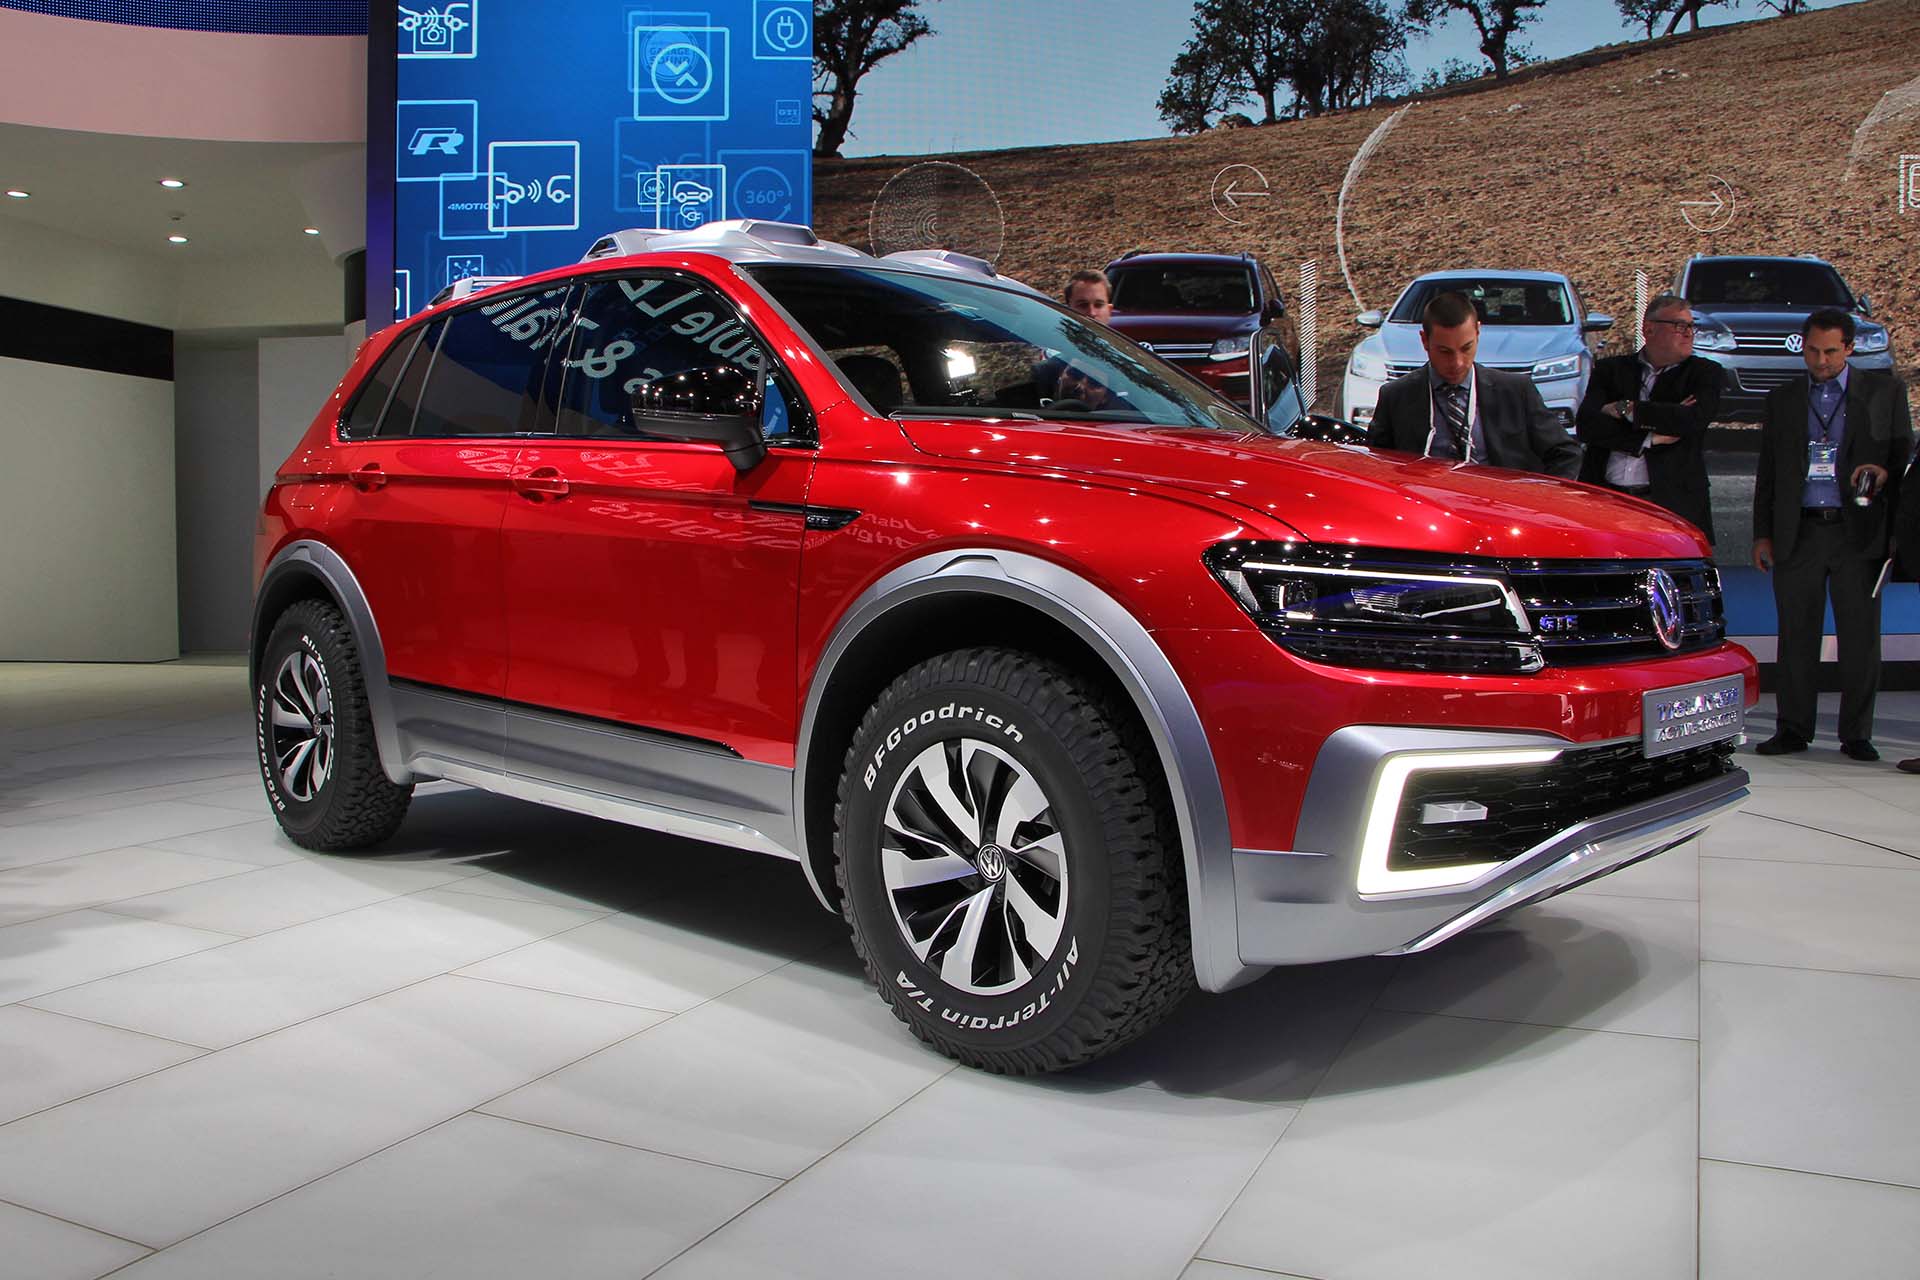 Volkswagen's Tiguan GTE Active off-road hybrid concept also makes use of dual electric motors, but they're paired to a 12.4 kWh battery that'll go 32 km in electric-only mode. The gasoline engine automatically kicks in when the battery runs low or when your off-road hijinks call for more power. Who says green cars can't be dirty?